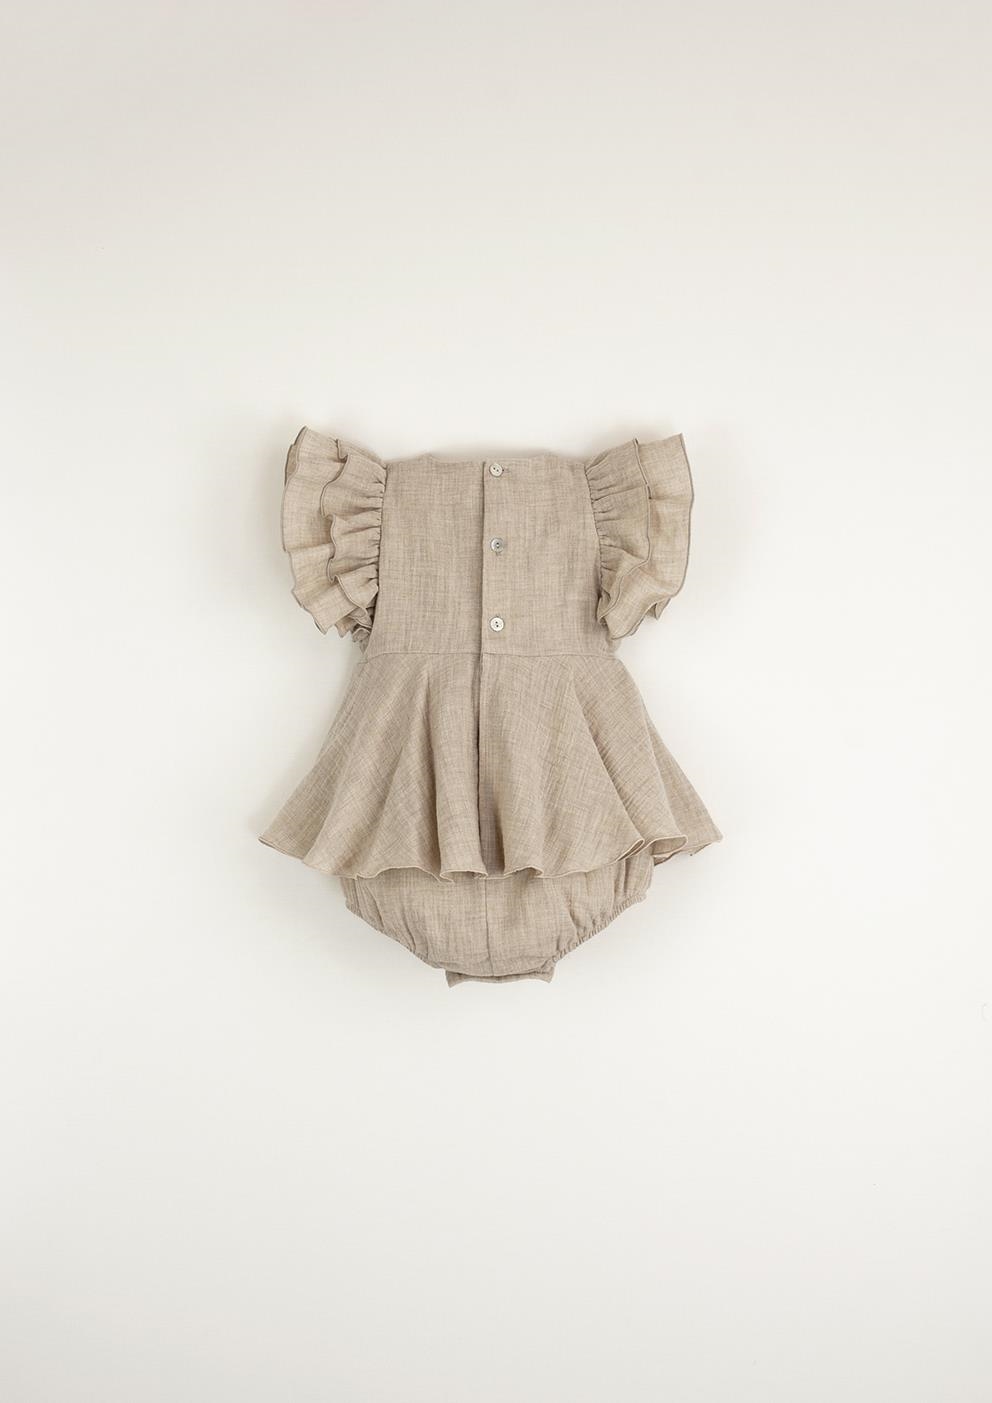 Mod.9.4 Organic sand romper suit with cape-style skirt | SS23 Mod.9.4 Organic sand romper suit with cape-style skirt